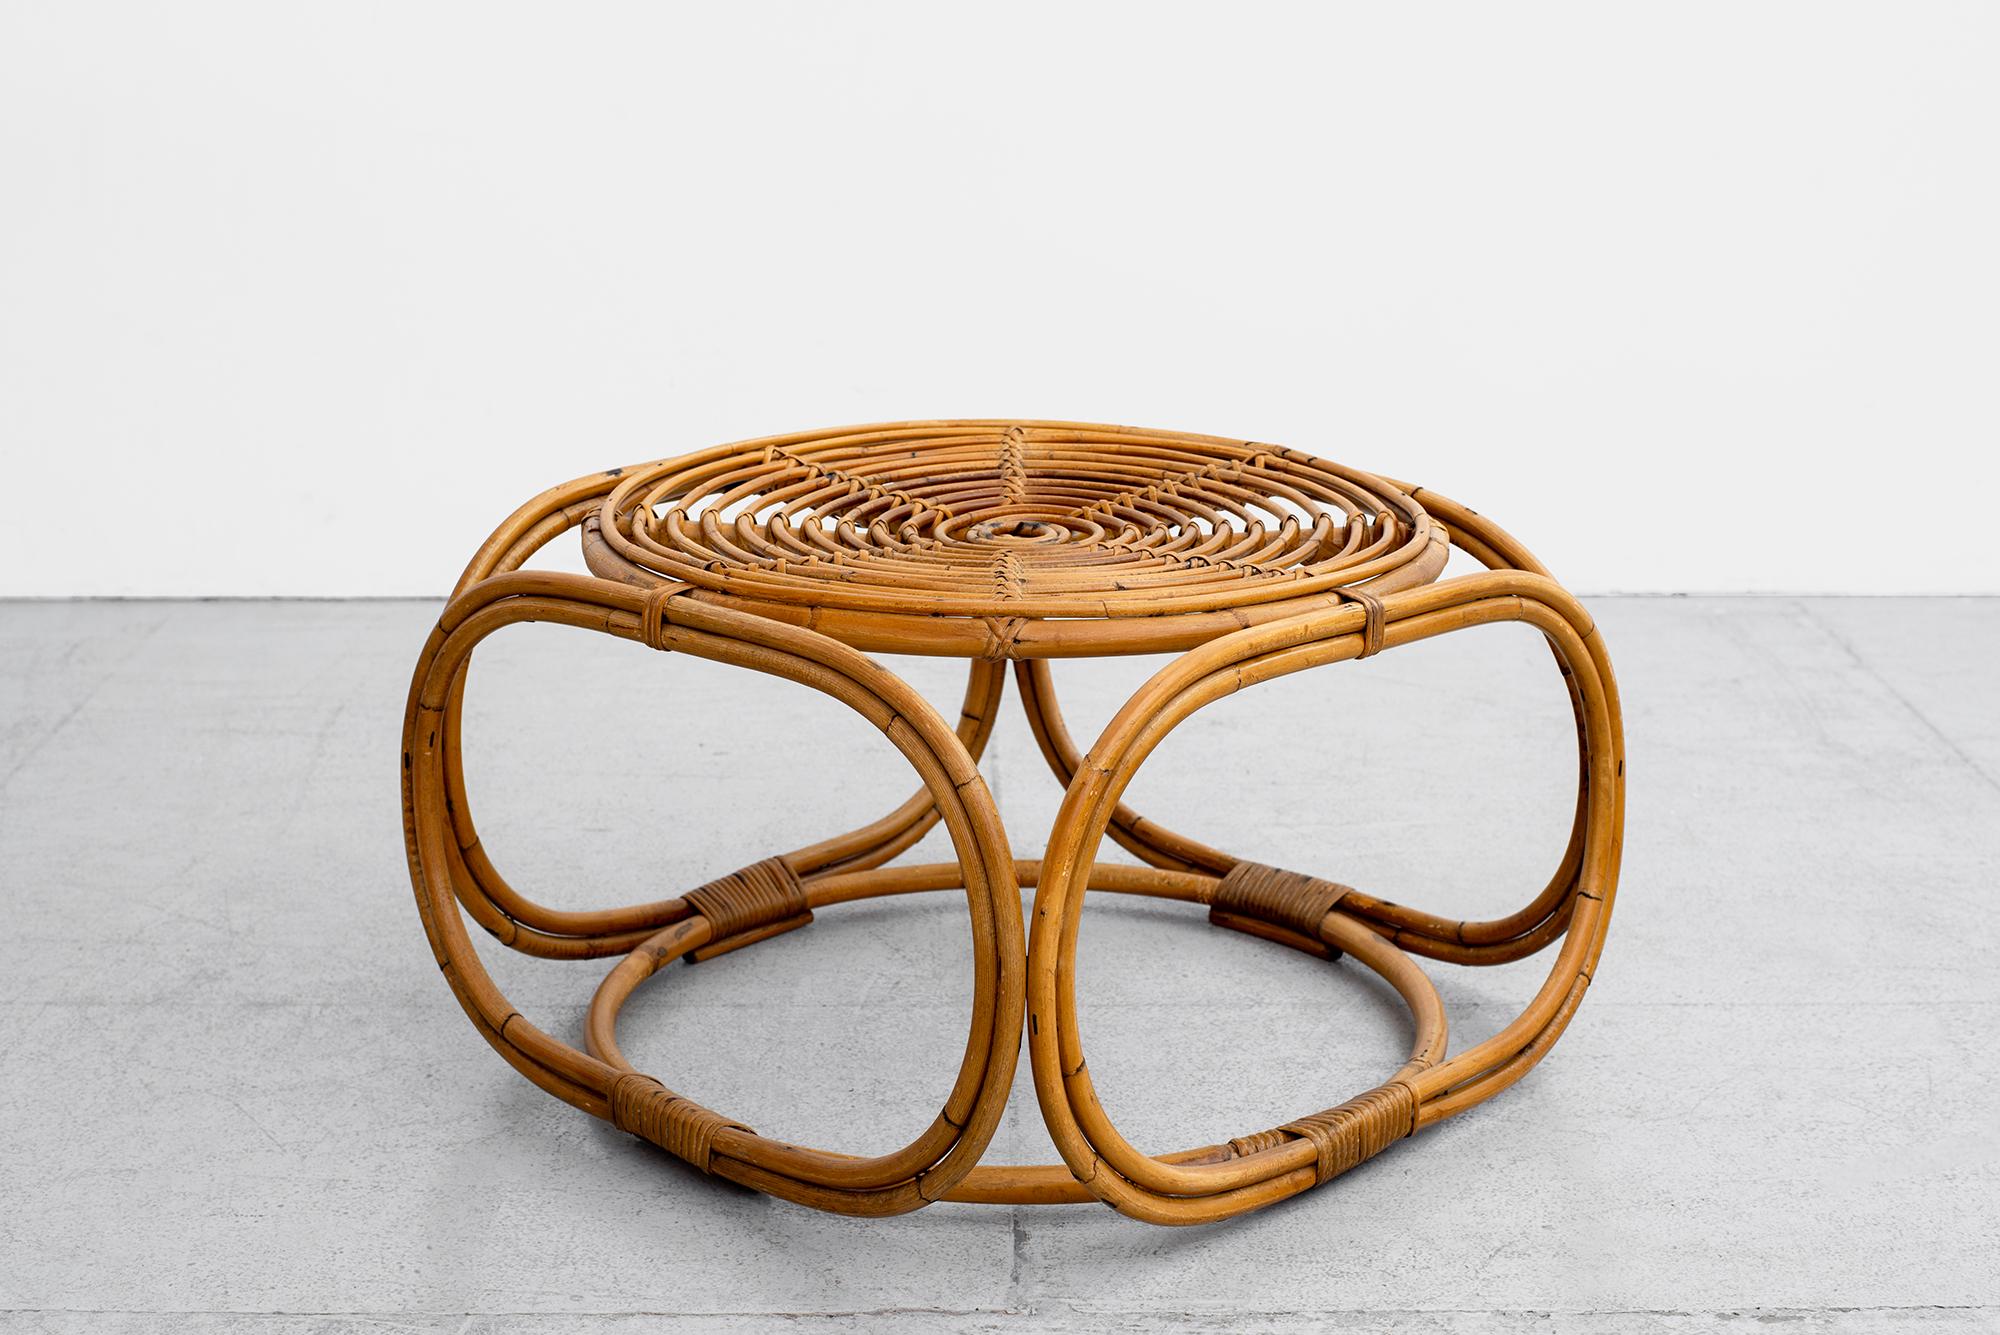 Square bent rattan table with sculptural shape.
Wonderful concentric circle design. 

 